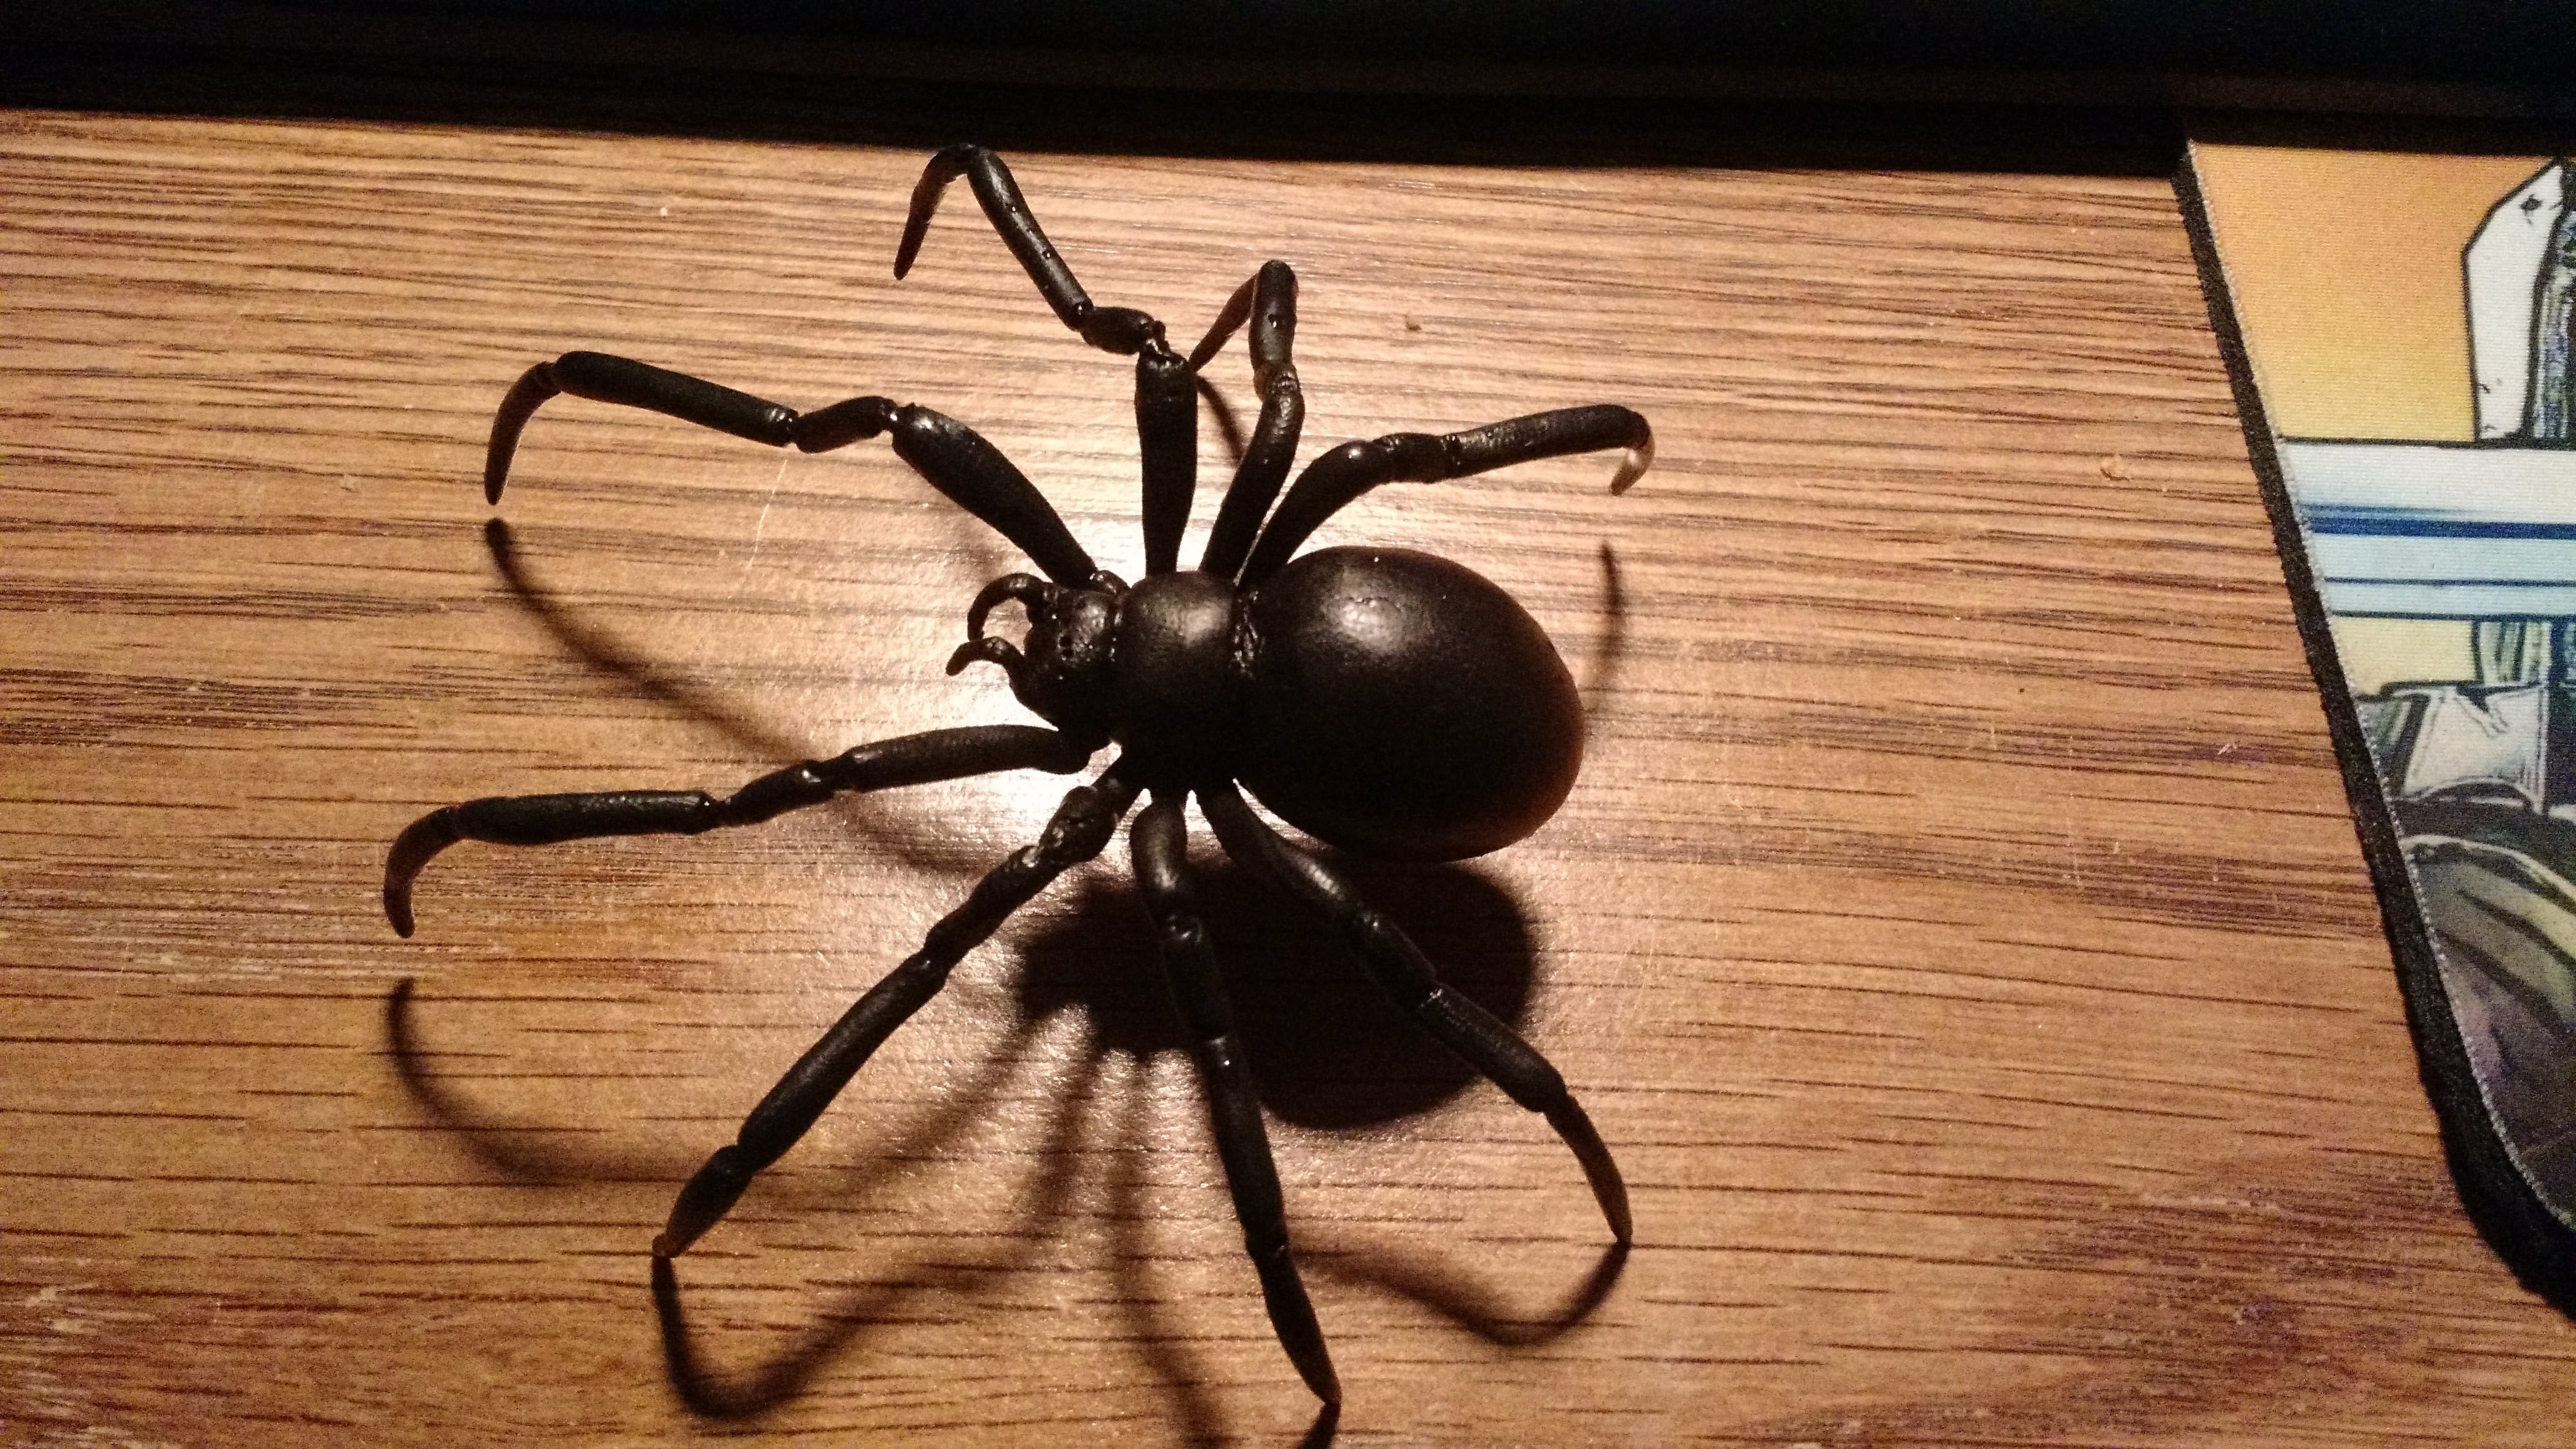 Black widow spider sculpture made with InstaMorph moldable plastic.